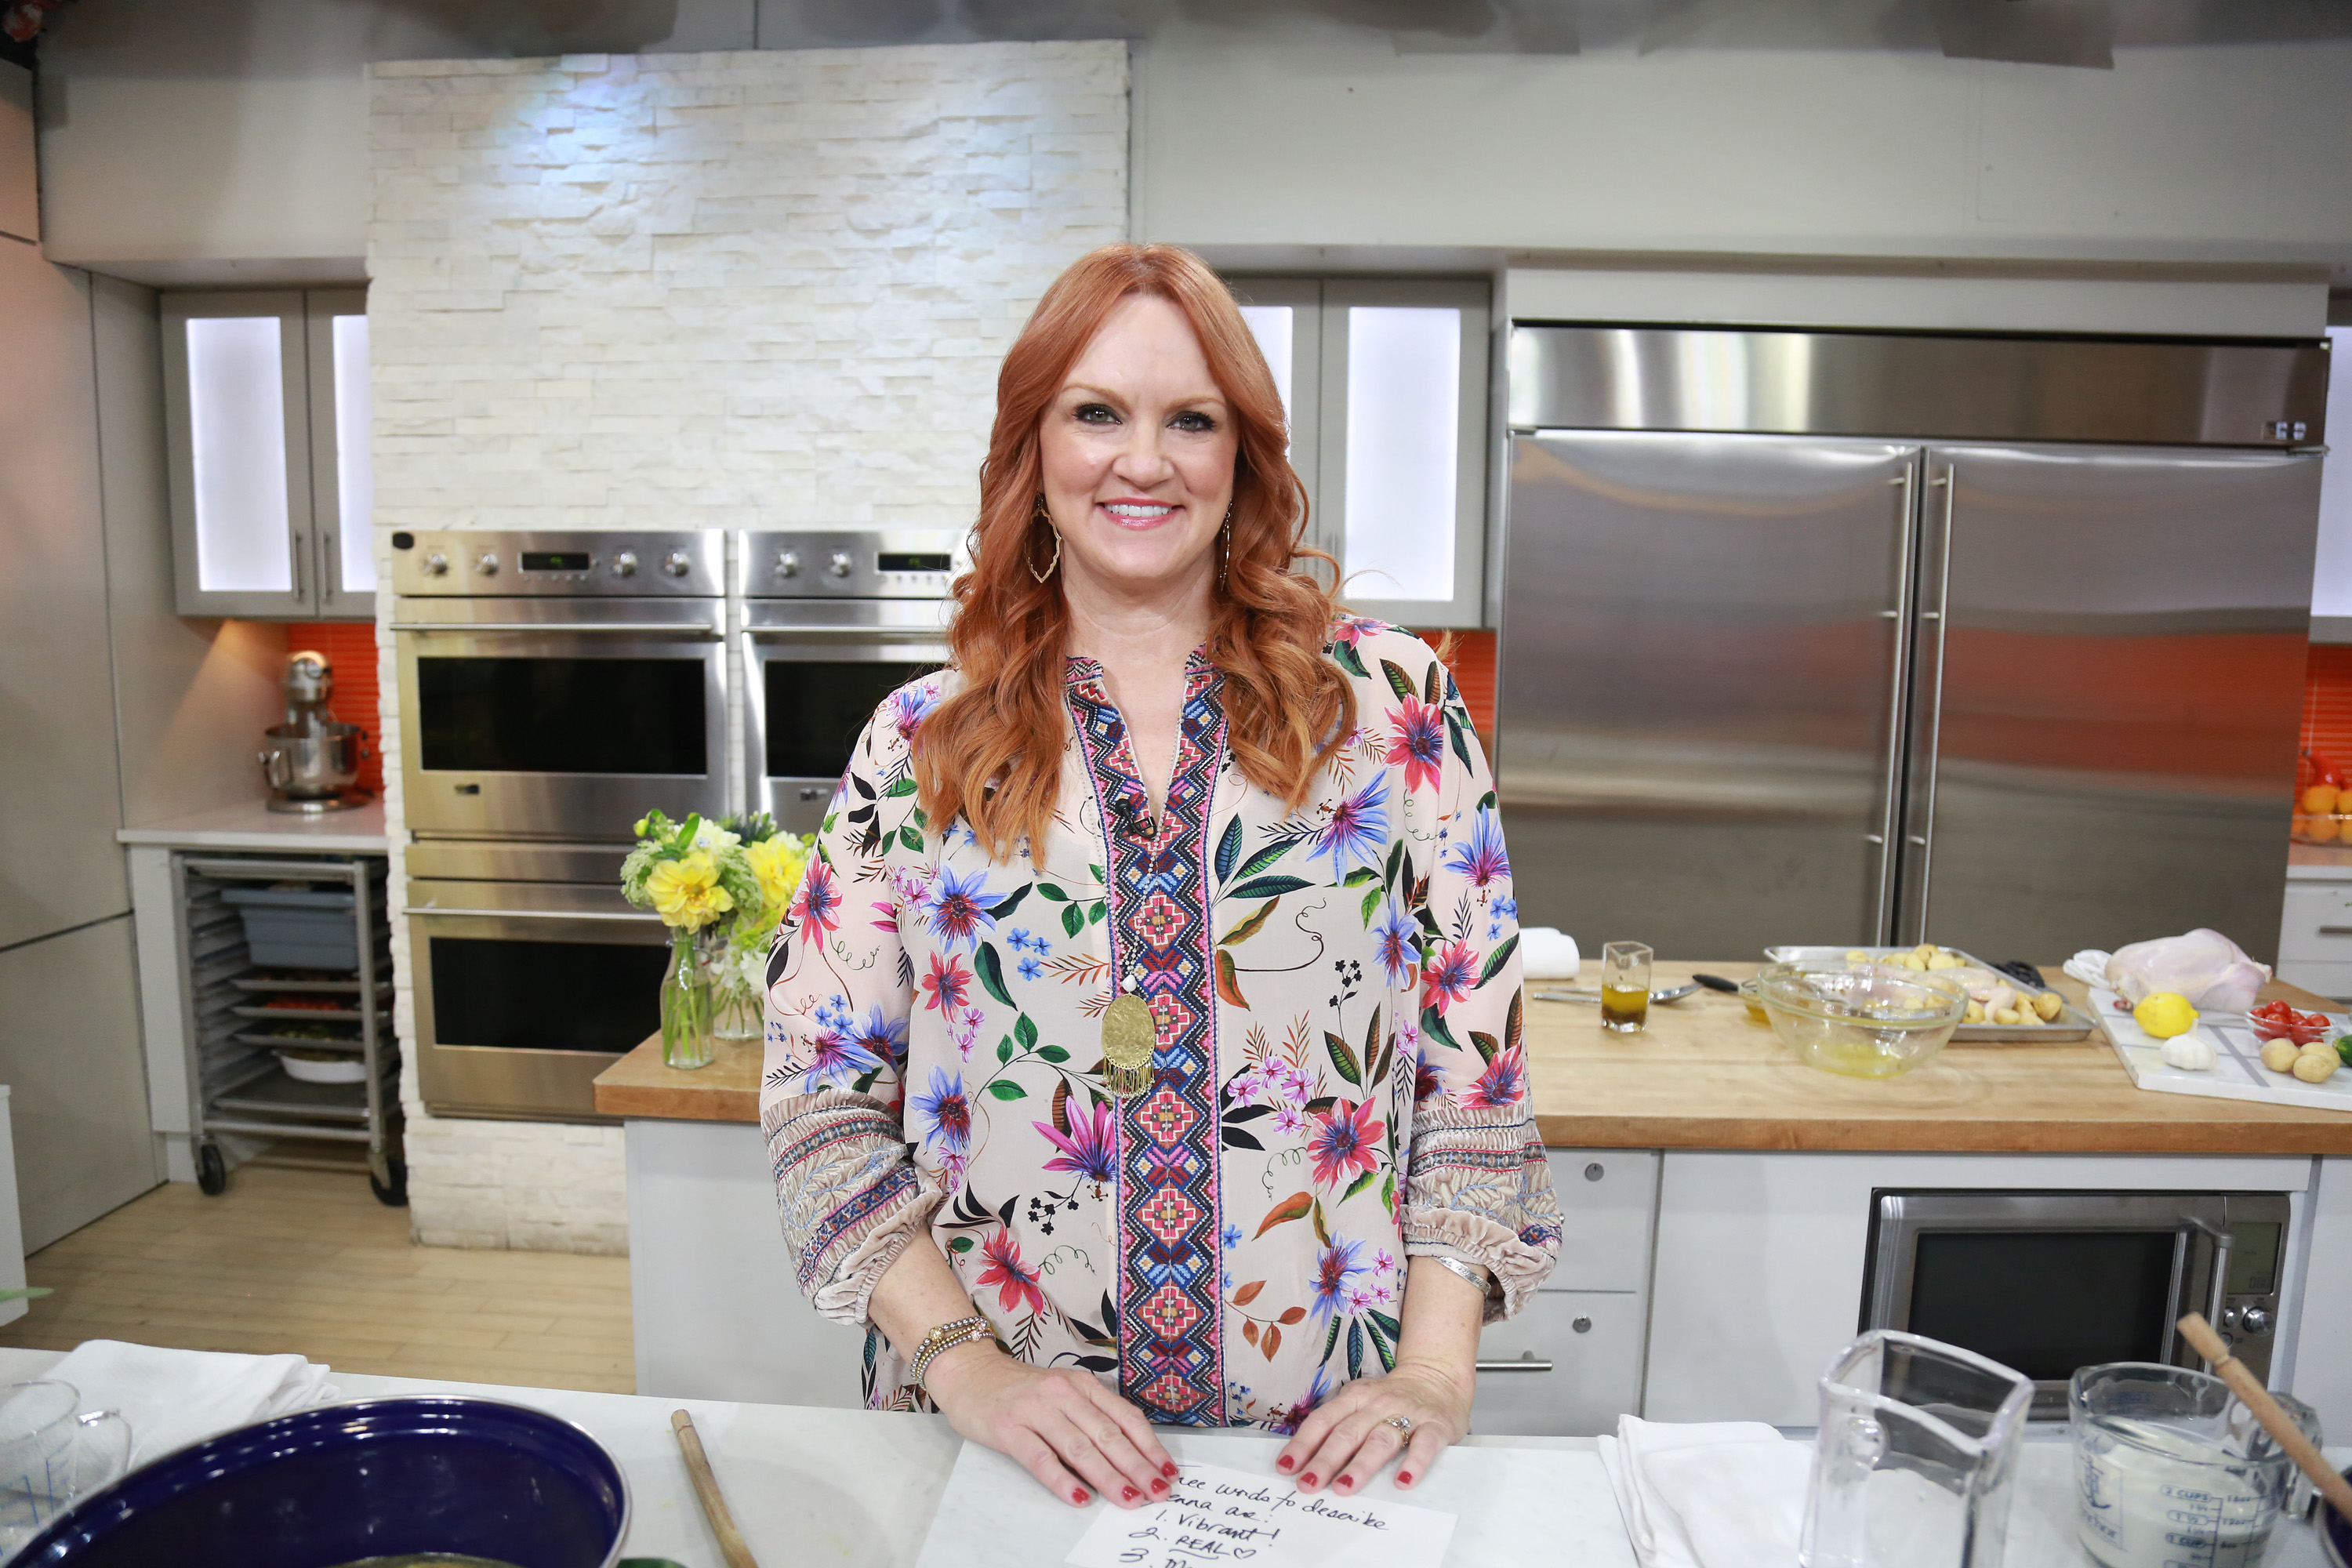 The Pioneer Woman Ree Drummond poses in the Today show kitchen before a cooking demonstration.